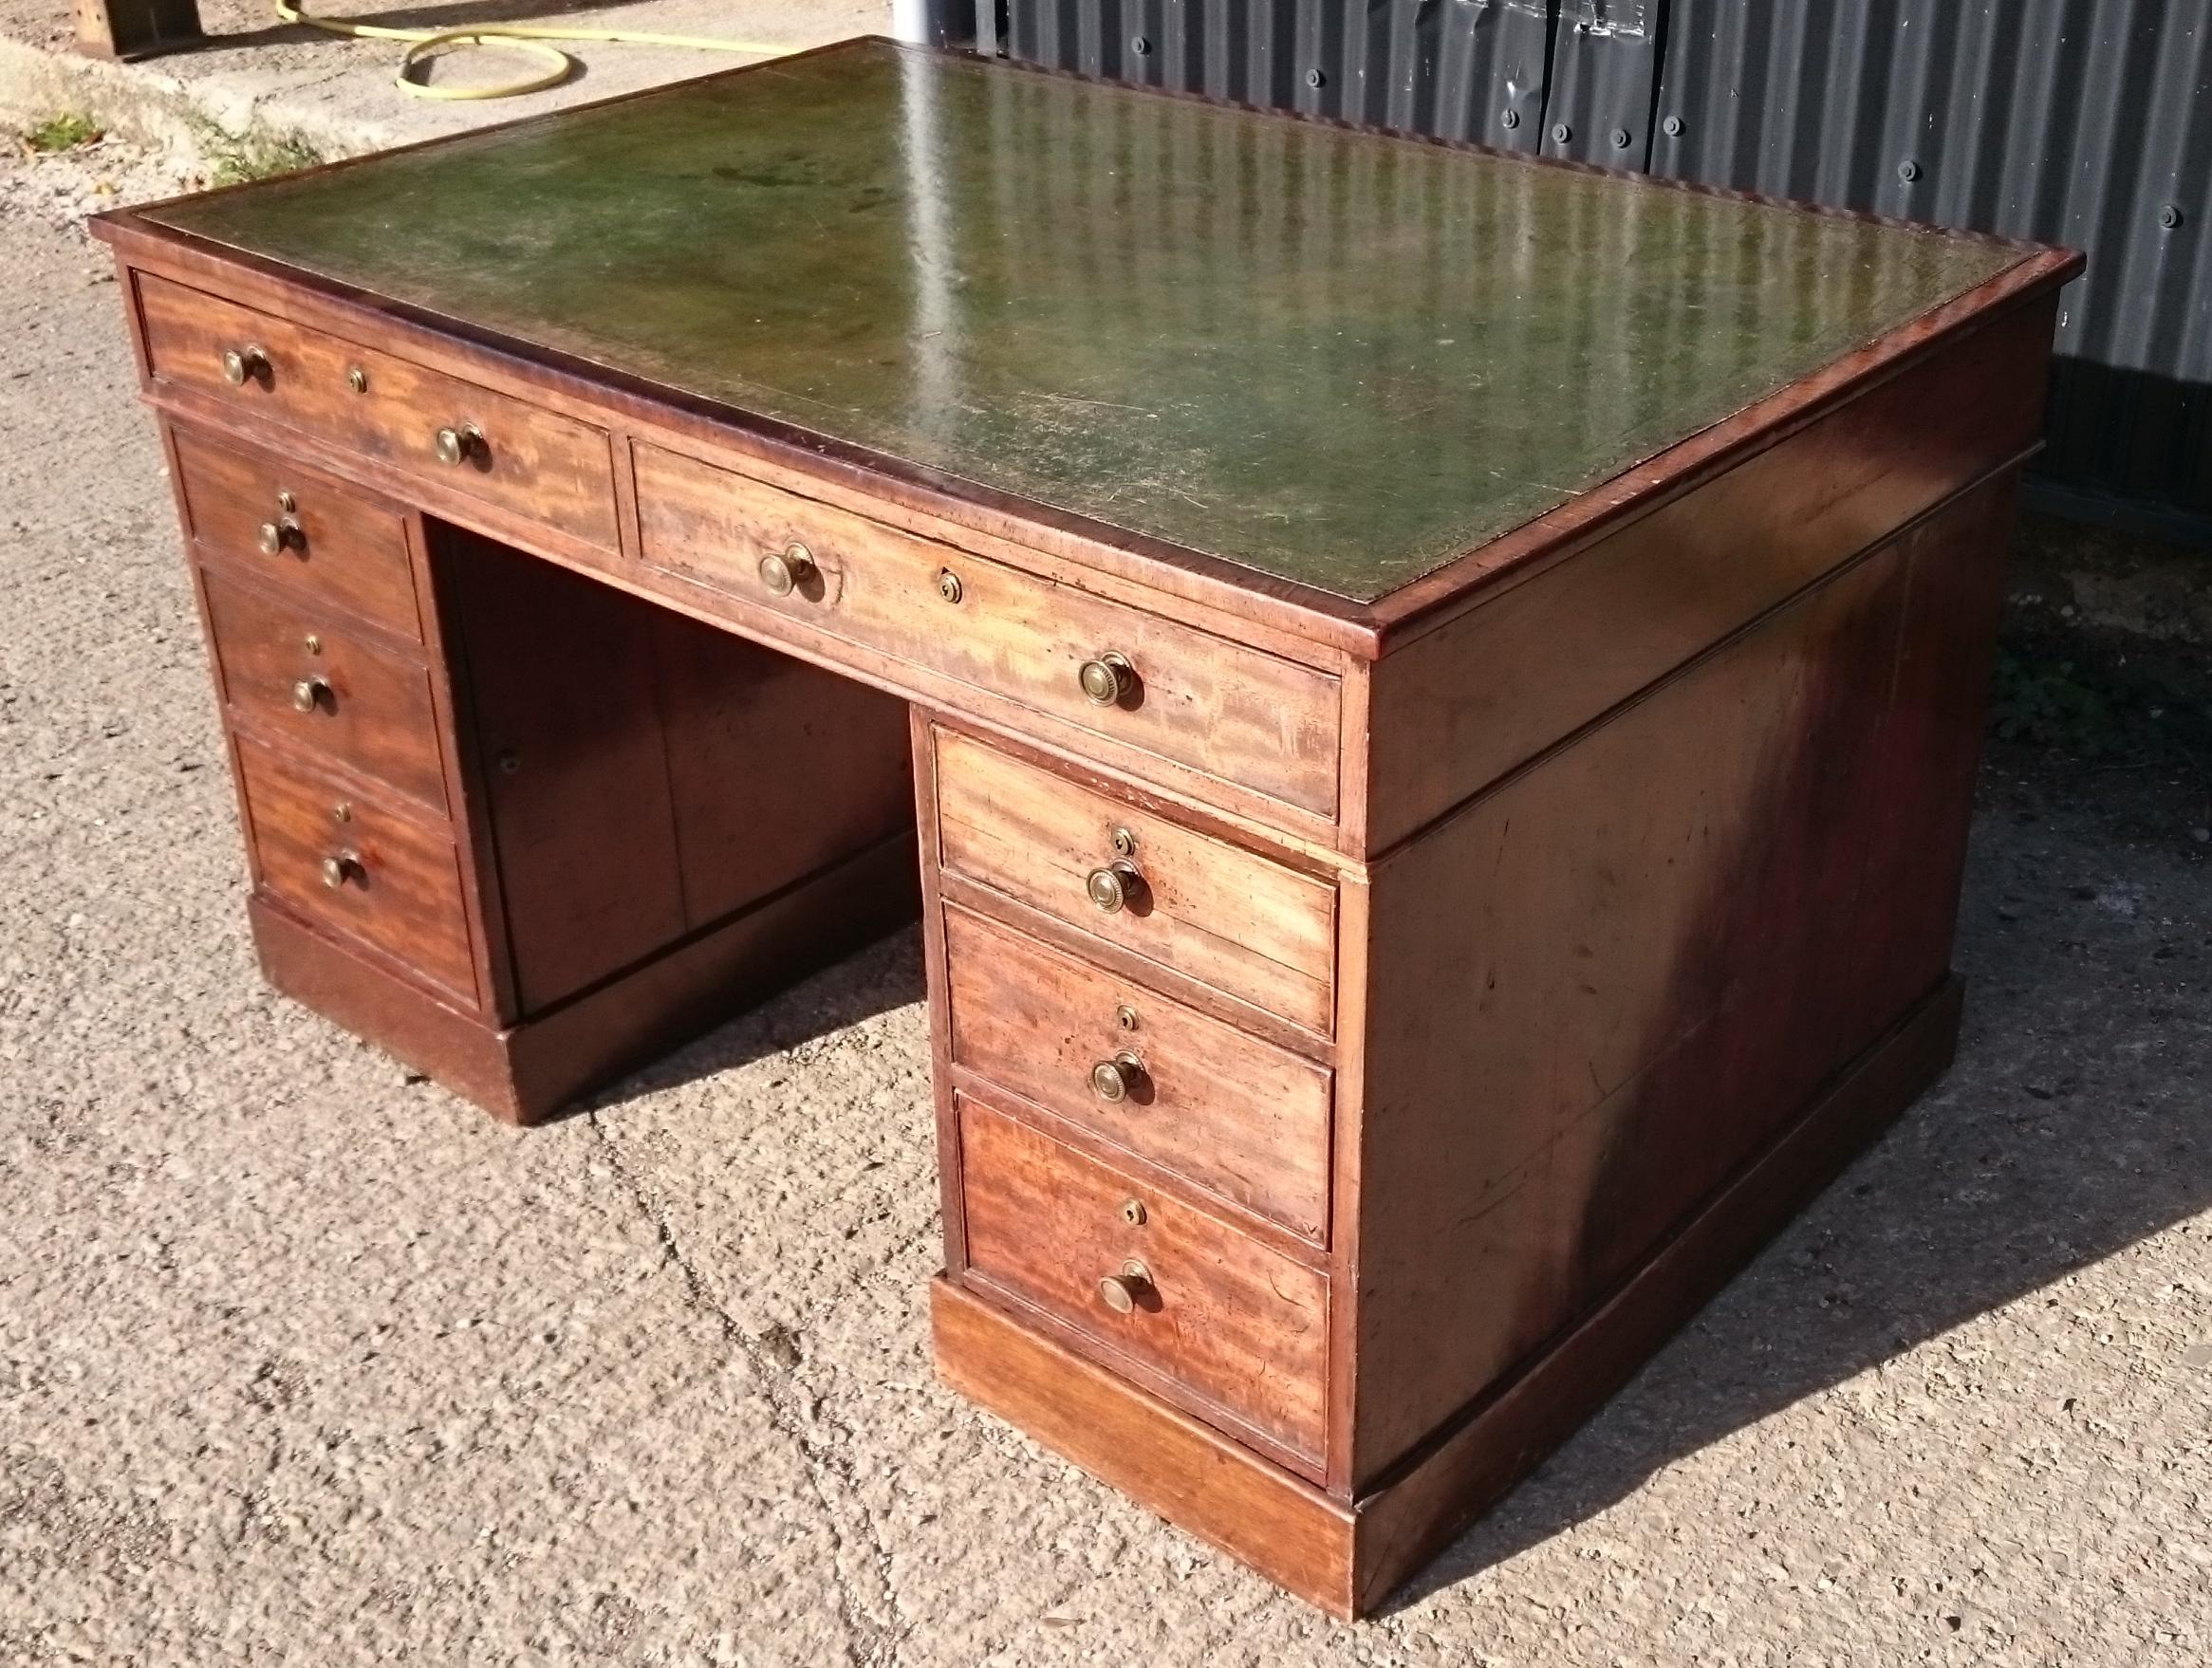 Early 19th century pedestal desk with five drawers and one cupboard on one side. The cupboard is disguised with false drawer fronts. The other side of the desk is finished with mahogany but does not have dummy drawers. Because it does not have